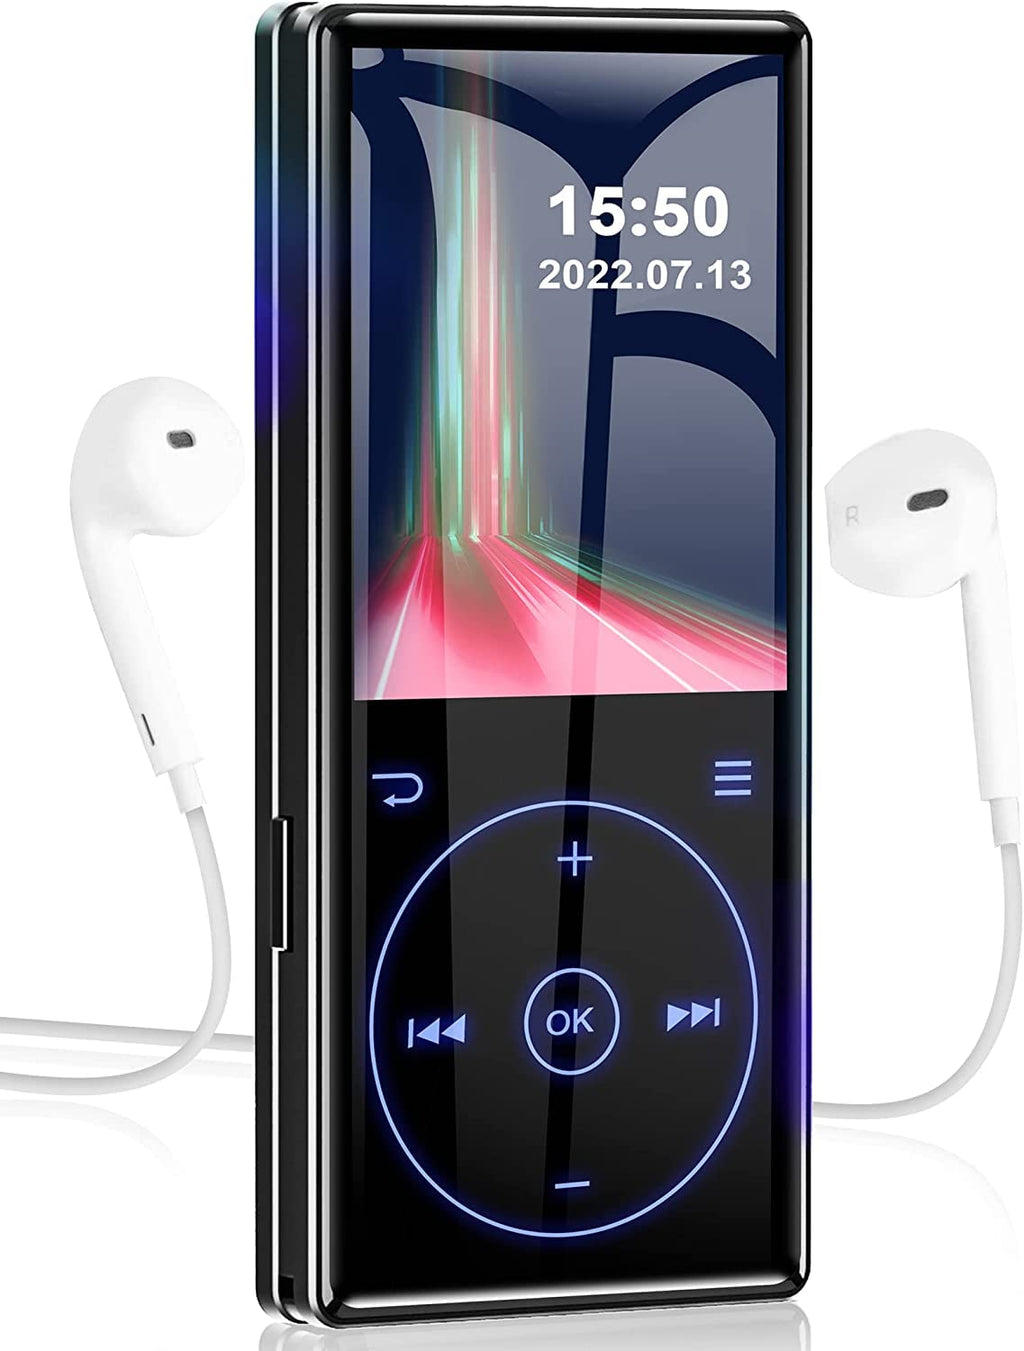  [AUSTRALIA] - 48GB MP3 Player with Bluetooth 5.0: Portable Lossless Sound Music Player with HD Speaker,2.4" Screen Voice Recorder,FM Radio,Touch Buttons,Support up to 64GB for Sport, Earphones Included Black